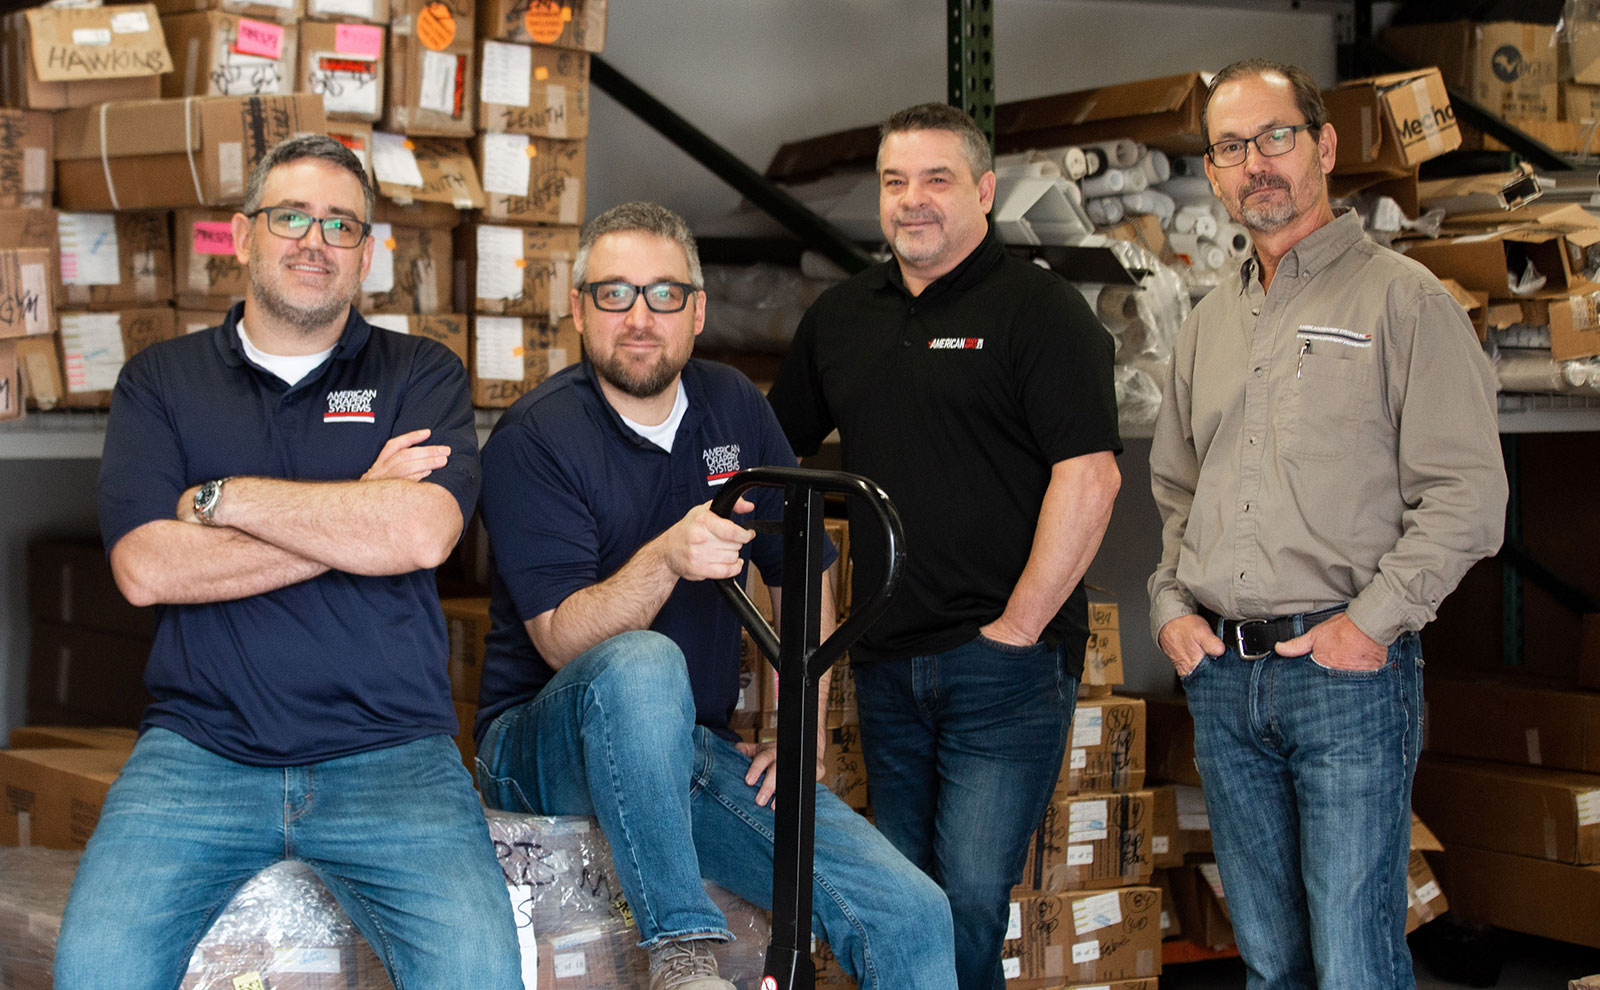 American Track Supply team in the warehouse